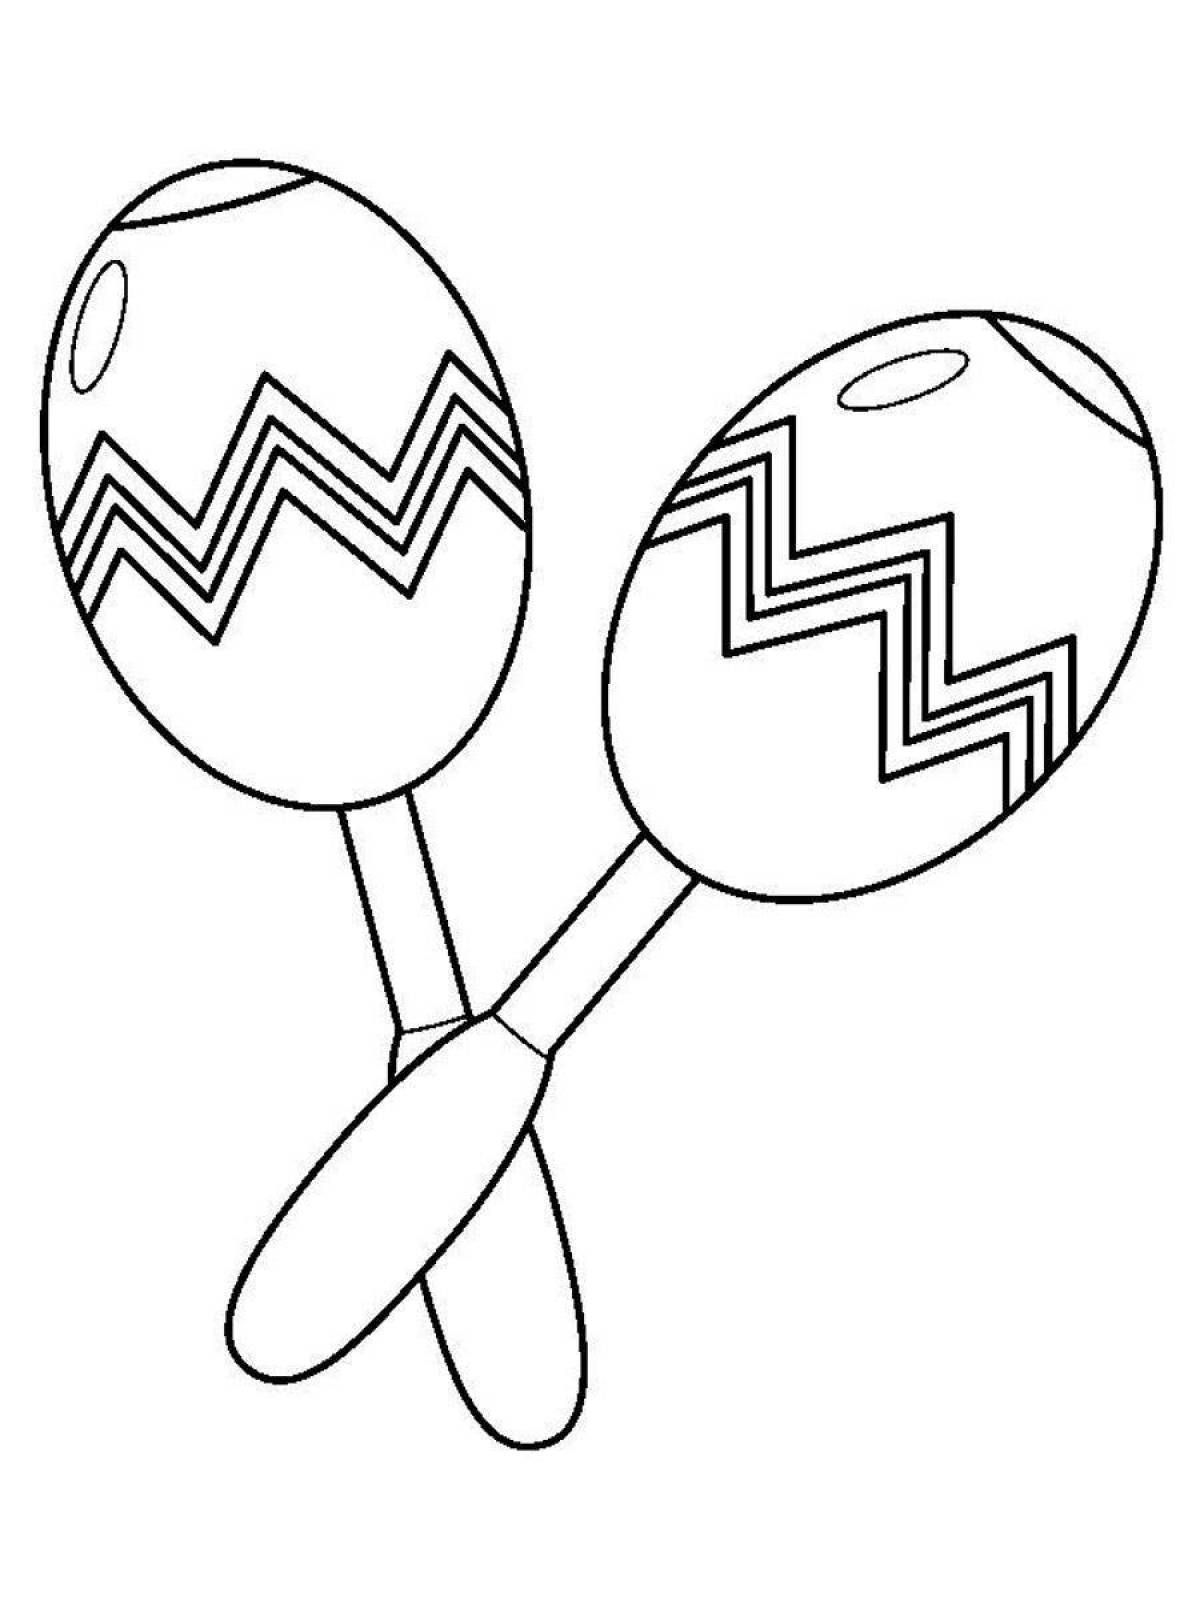 Decorated spoons for Russian folk instruments